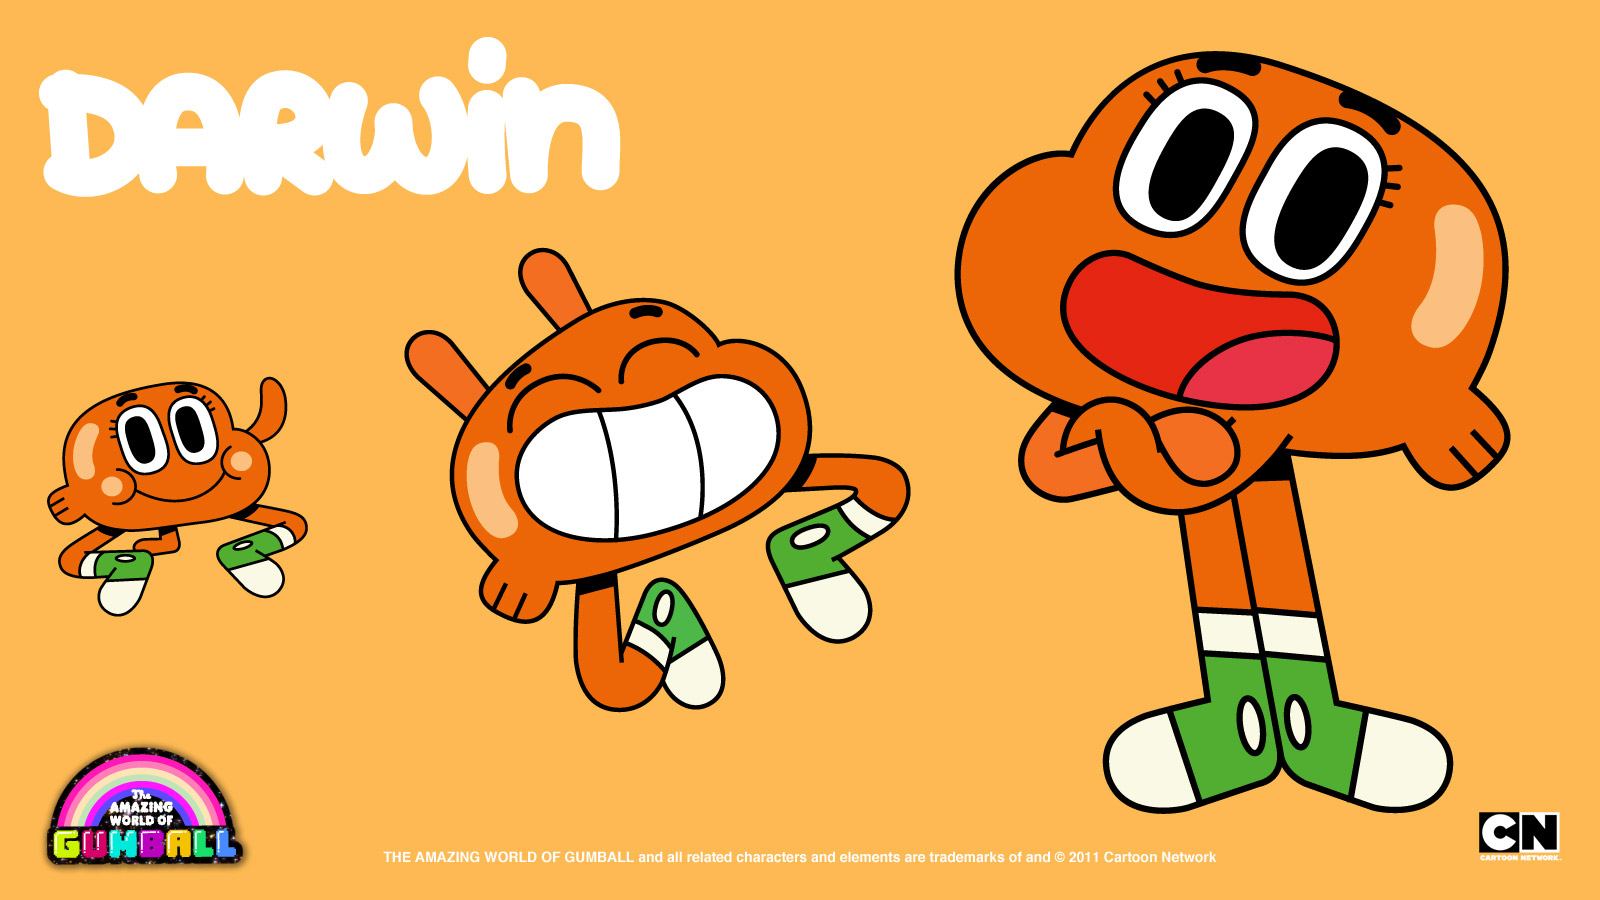 "The Amazing World of Gumball" - wide 7